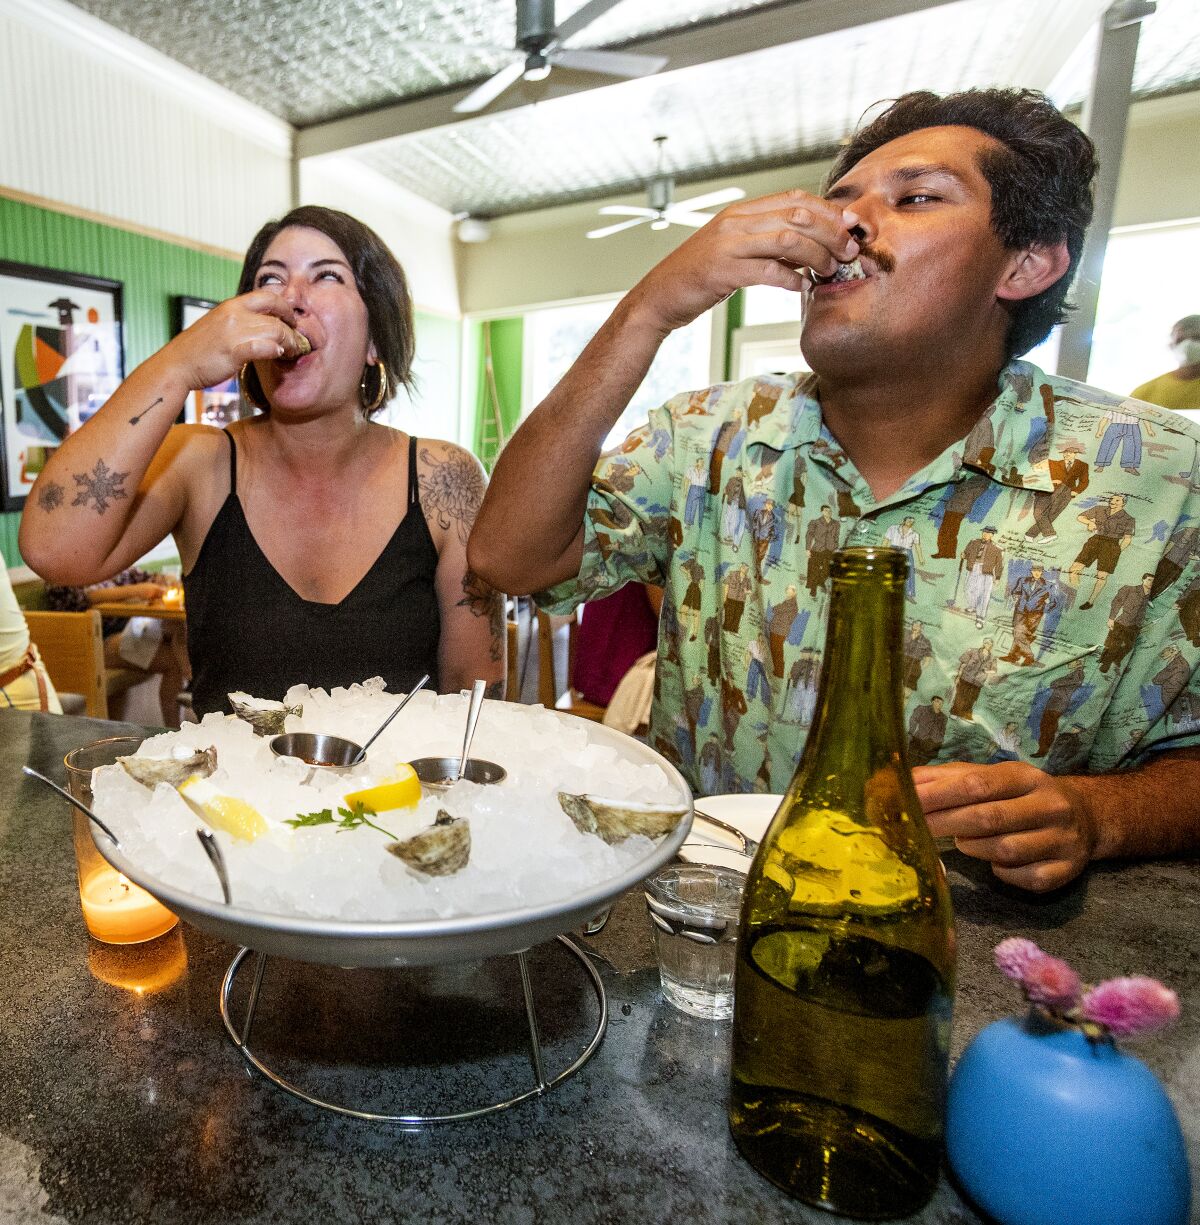 A woman and a man slurp oysters at a restaurant.